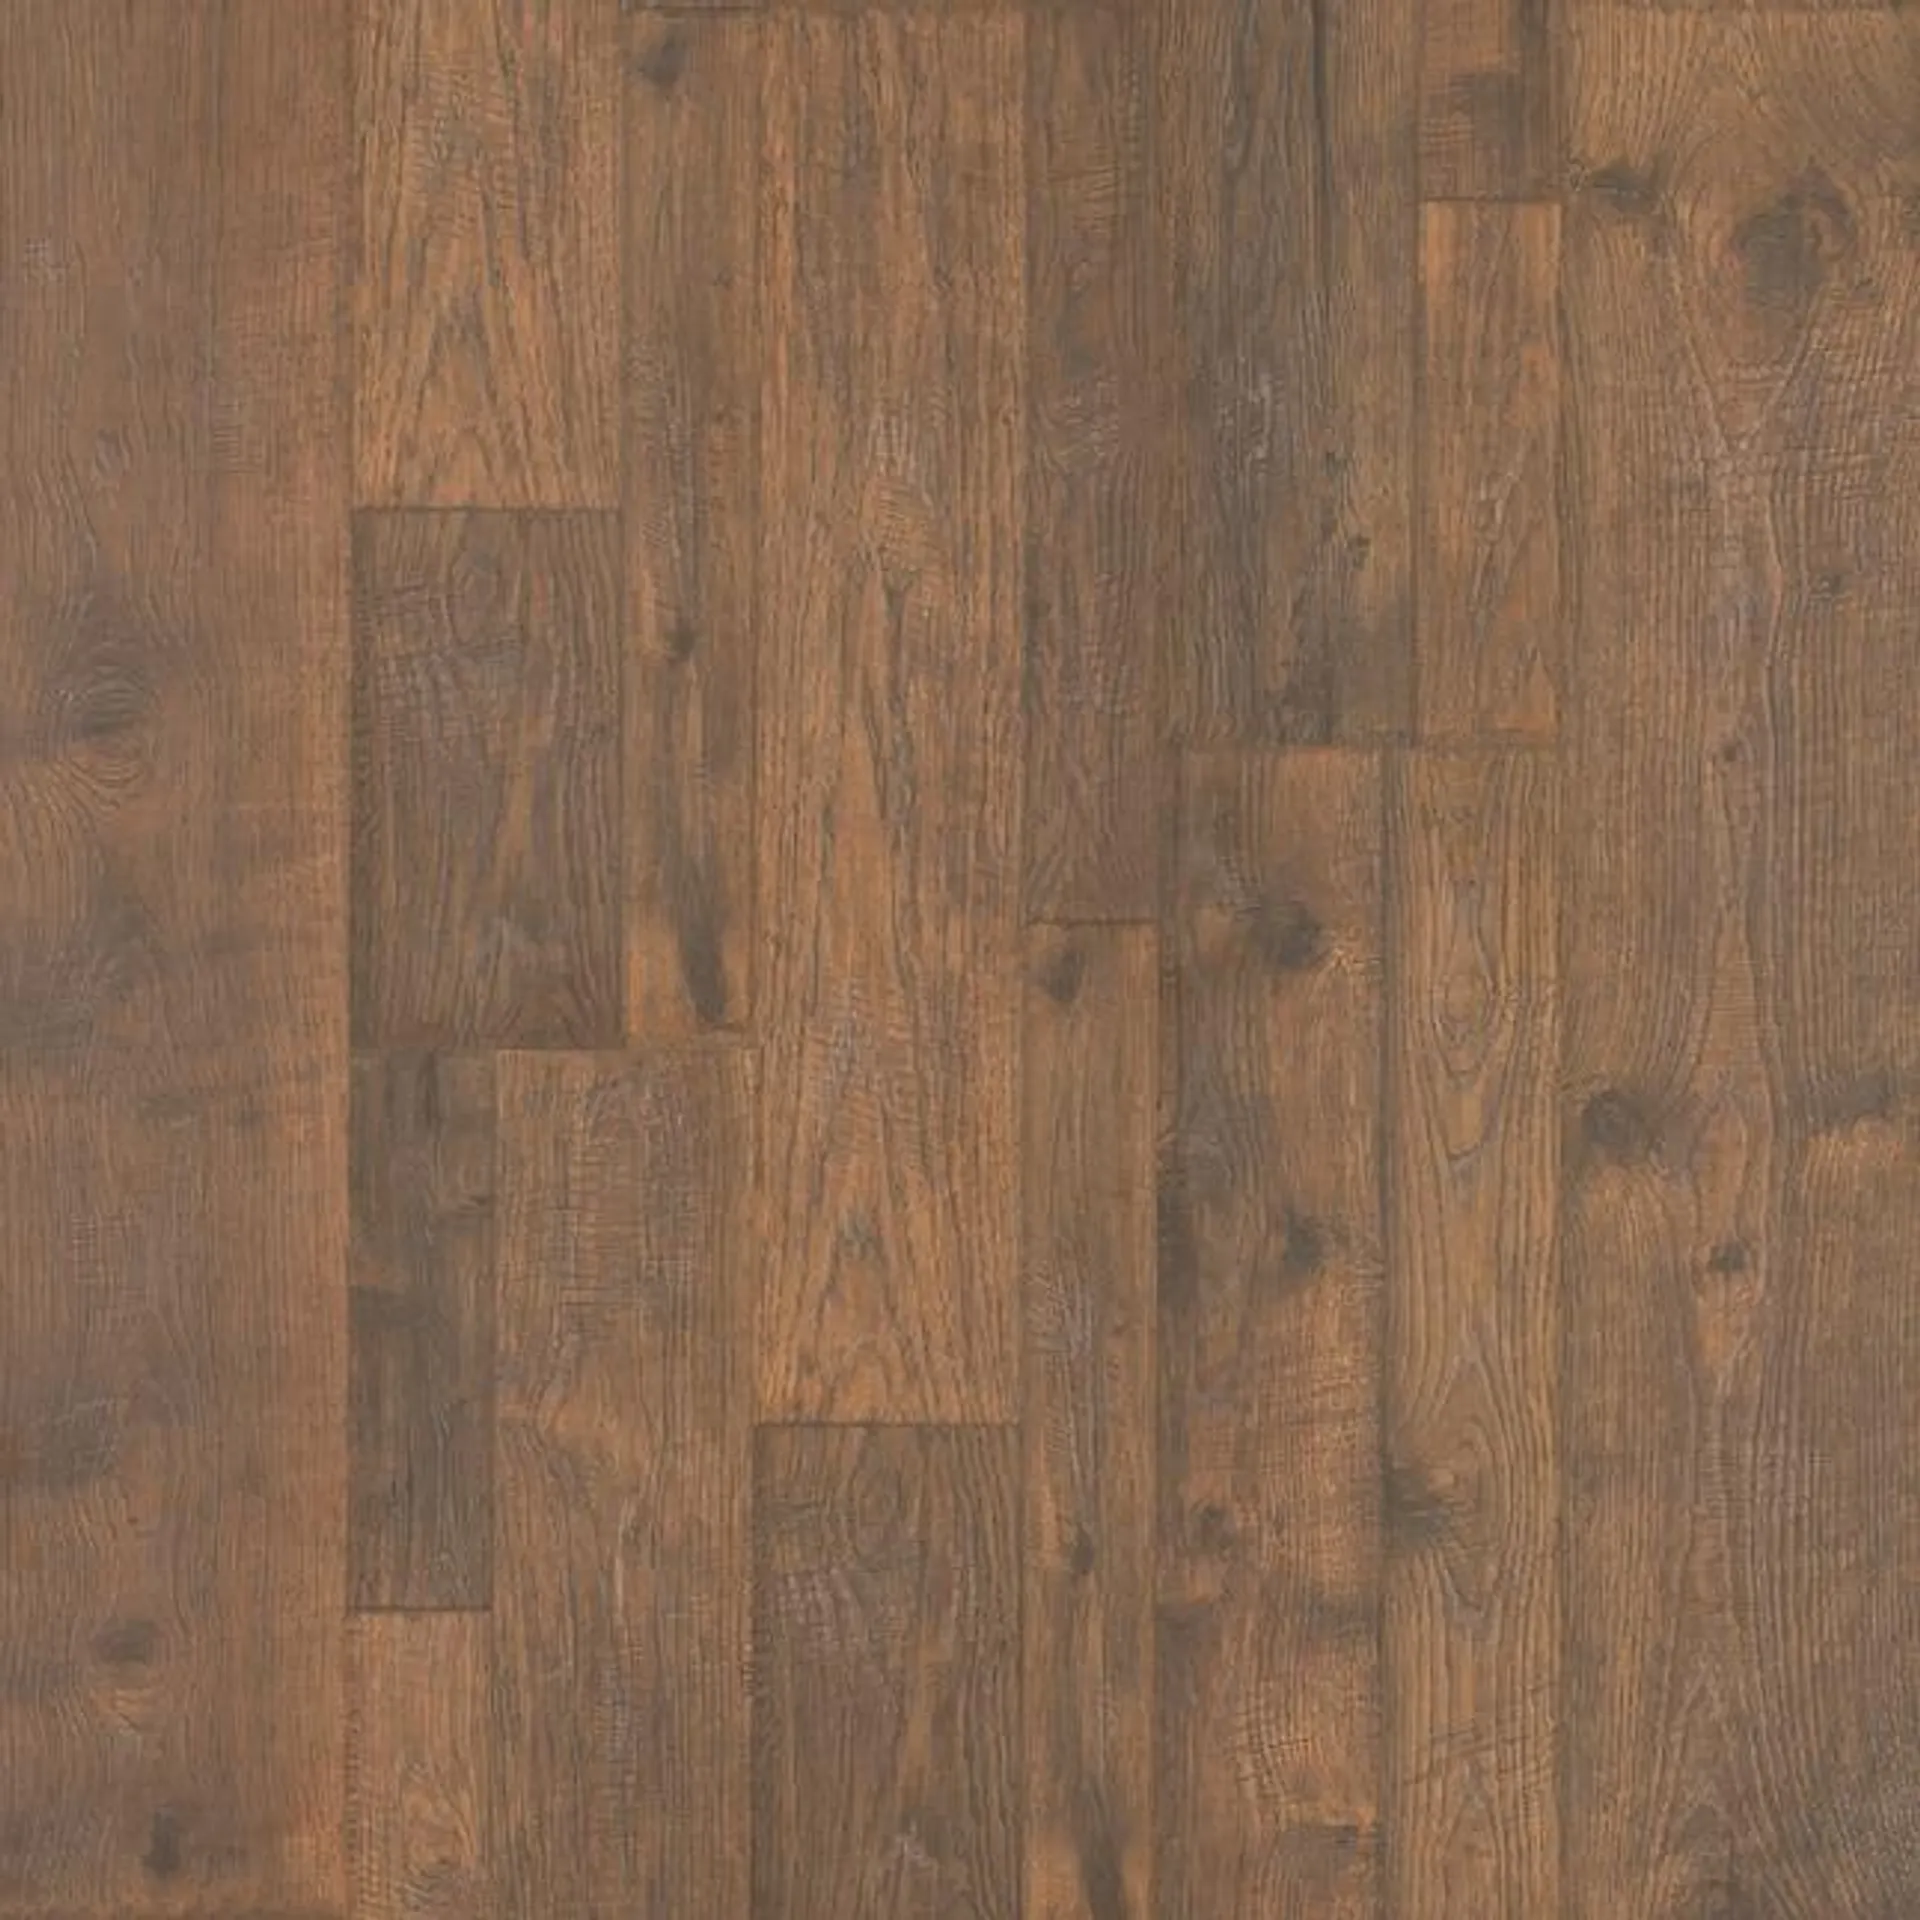 Pergo TimberCraft +WetProtect with Underlayment Attached Chester Ridge Hickory 12-mm T x 7-1/2-in W x 47-1/4-in L Waterproof Wood Plank Laminate Flooring (22.09-sq ft / Carton)